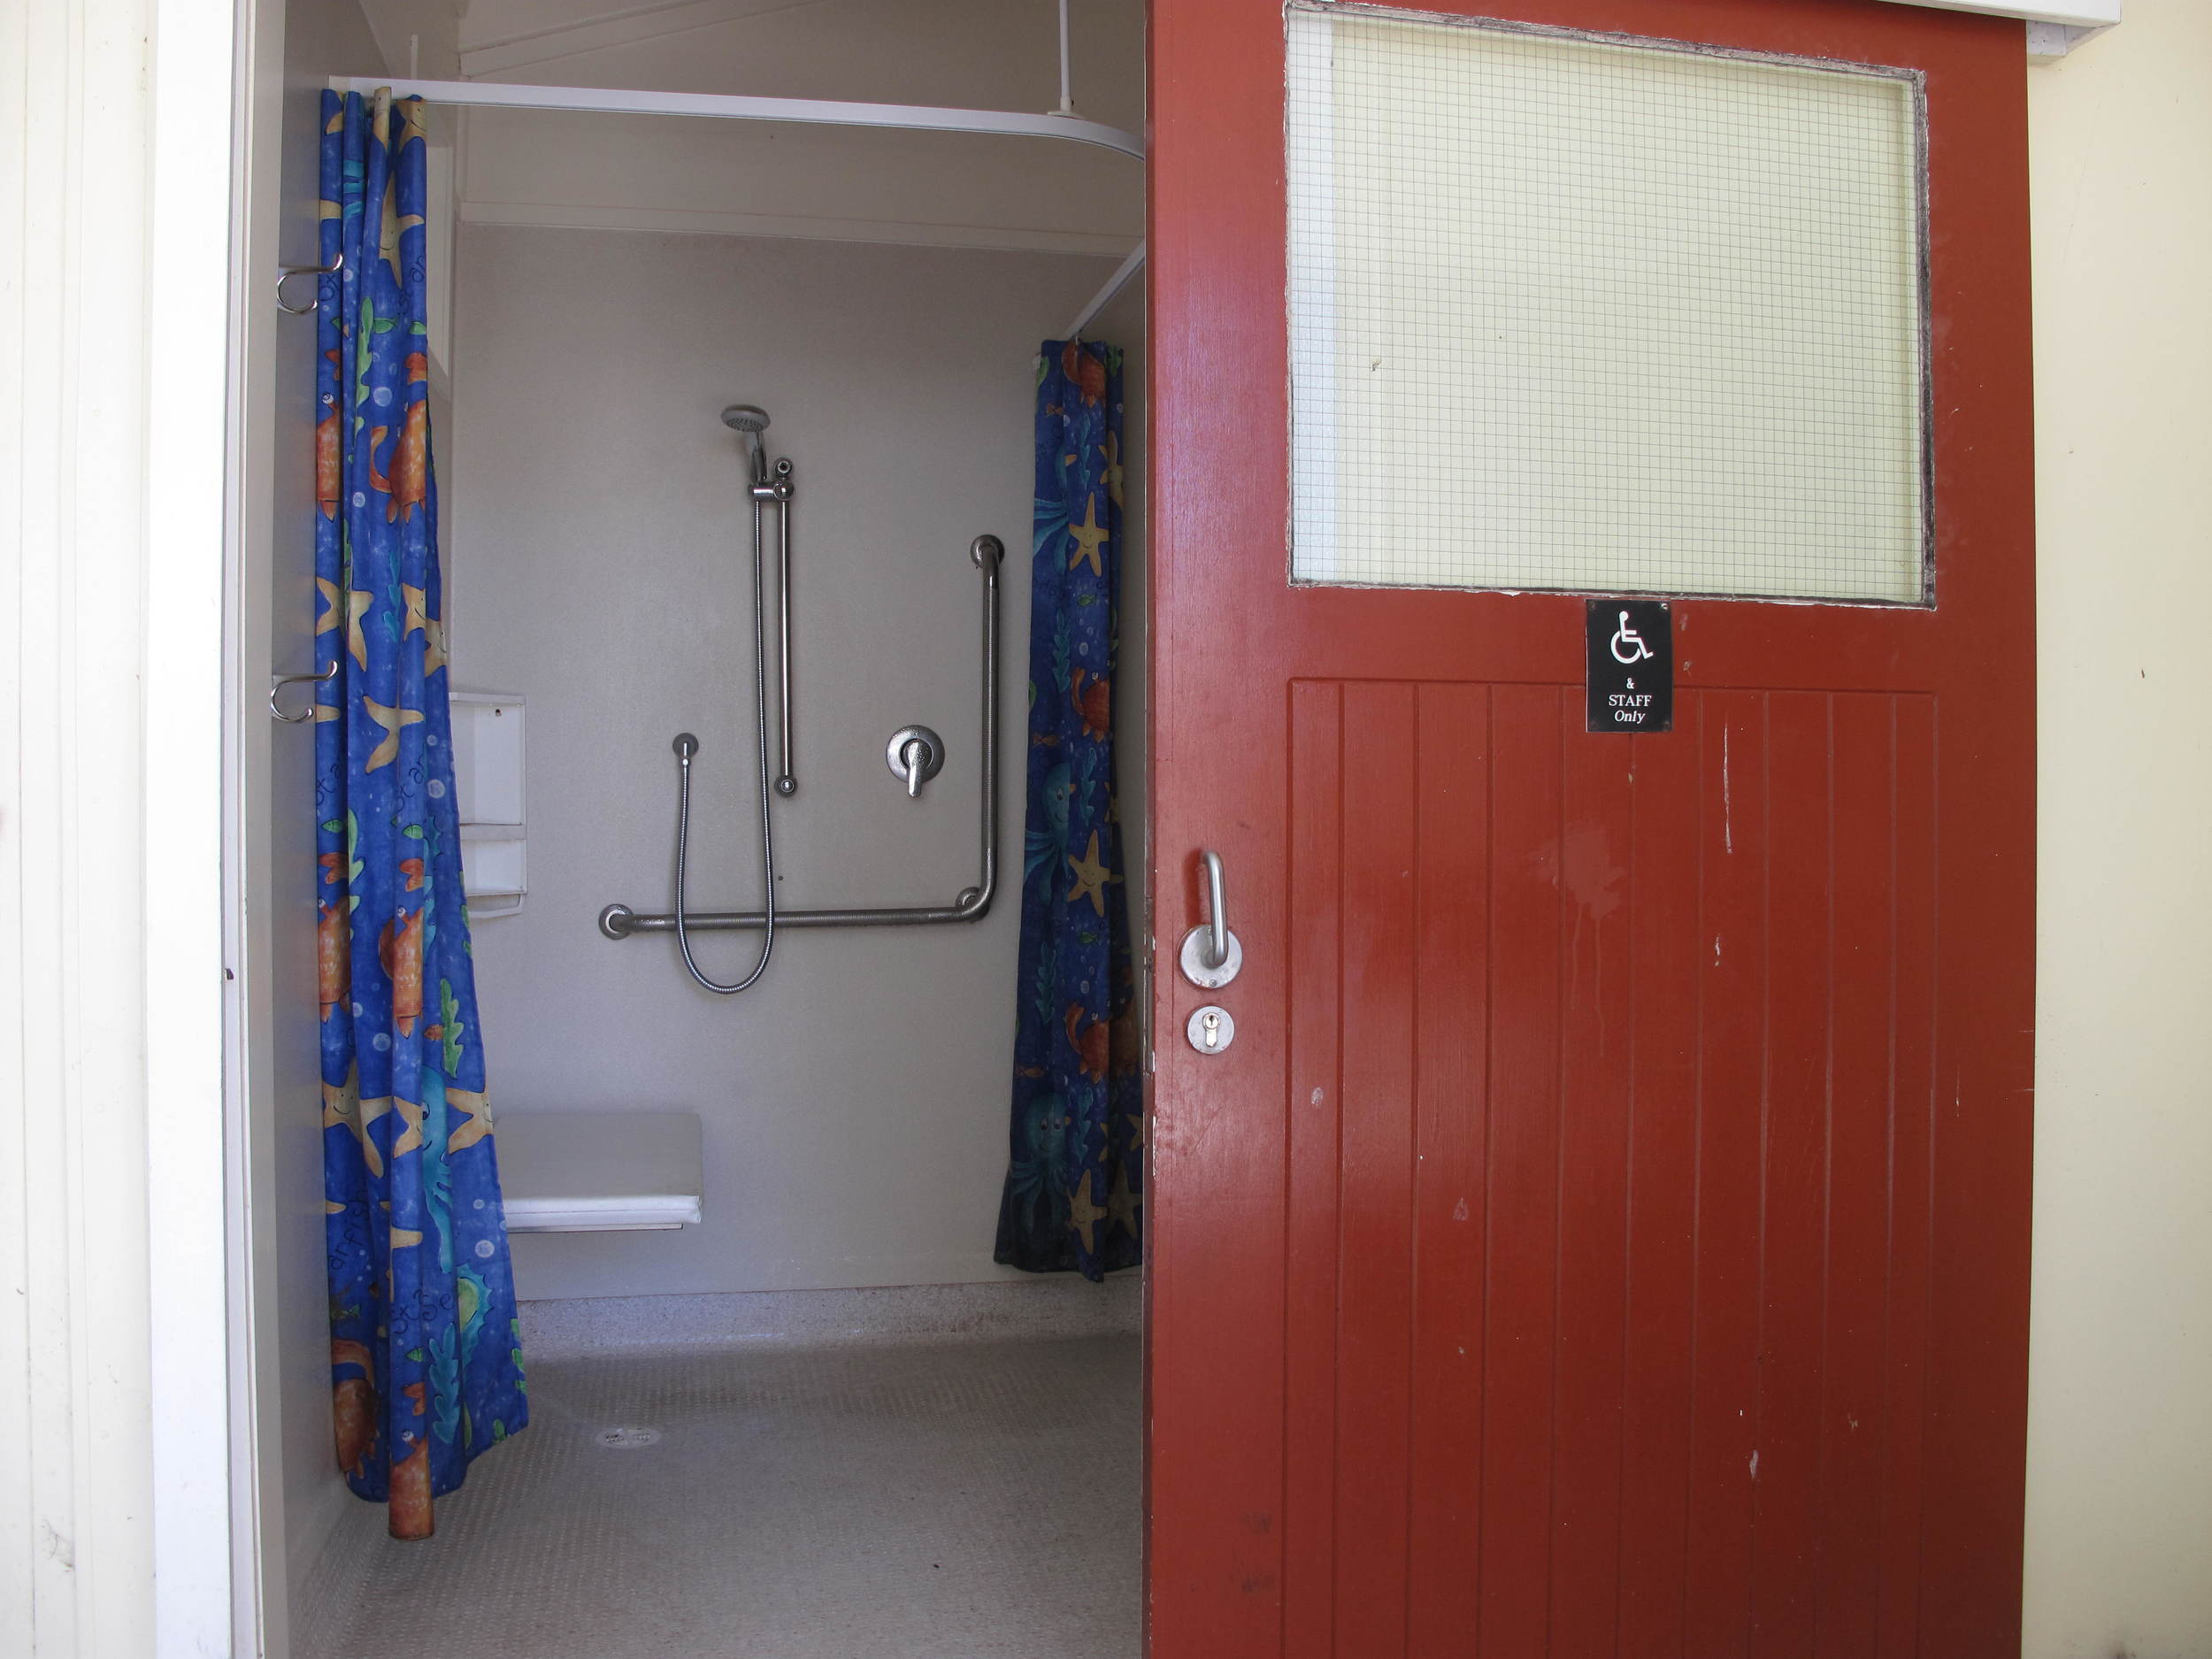   Most areas have disabled access. All adult disabled / adult showers have constant hot water.  